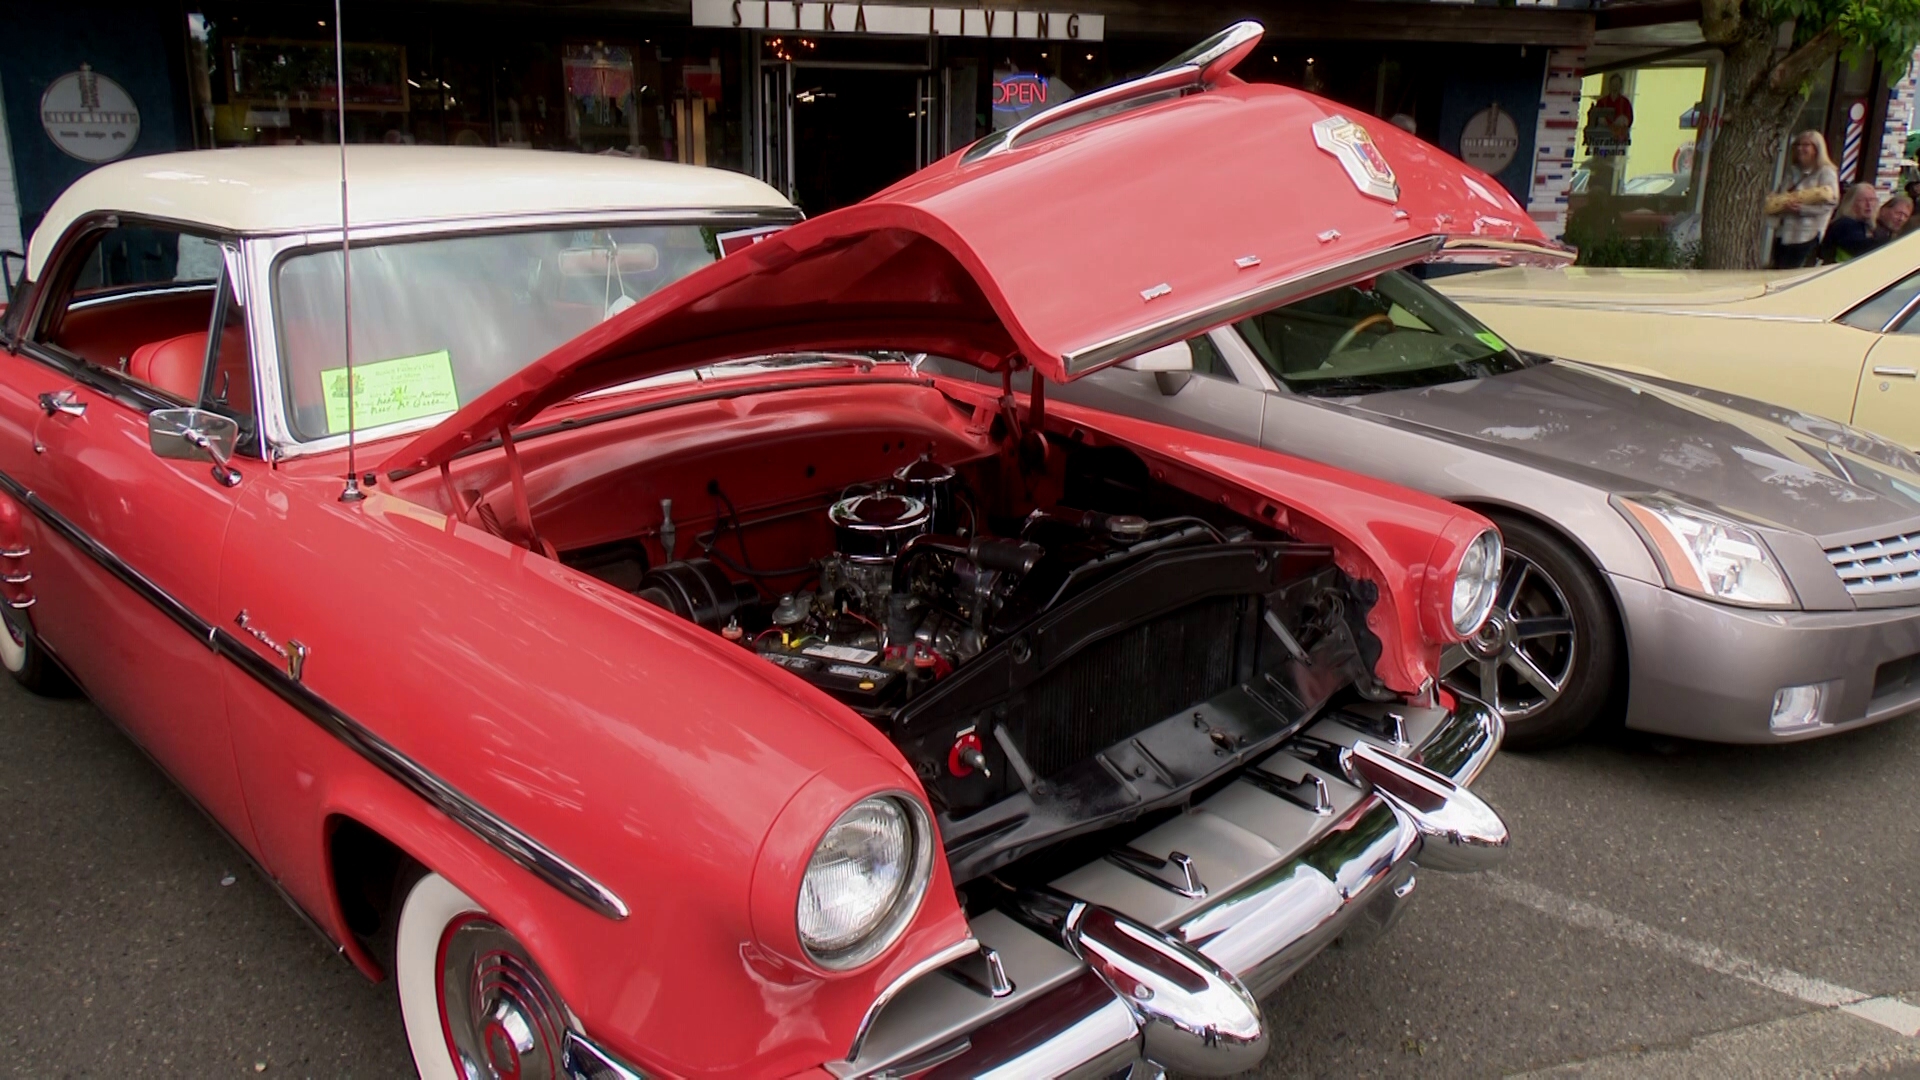 This is the 23rd annual car show in the city, featuring more than 300 unique and vintage cars across a five-block span in the heart of Burien.